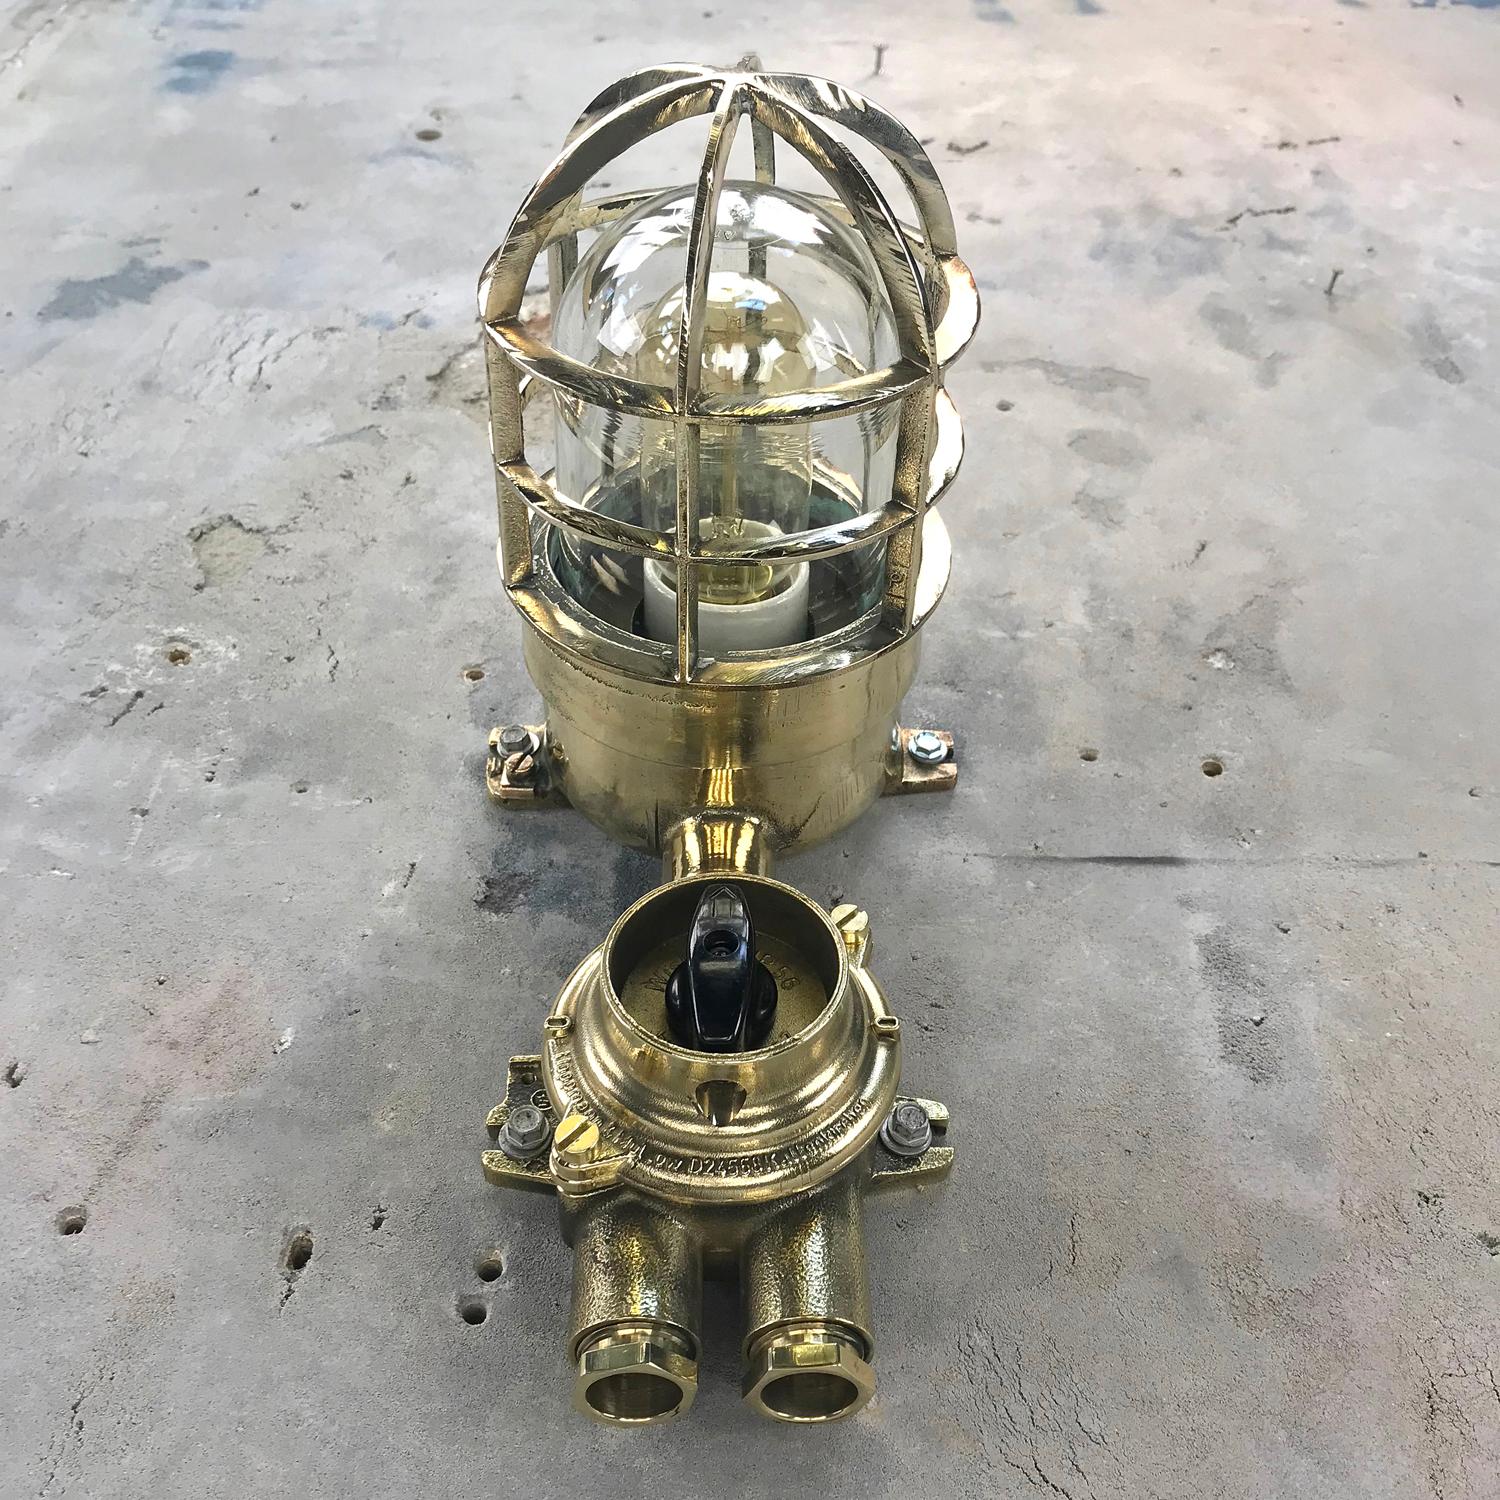 1970s German Explosion Proof Wall Light Cast Brass, Glass Shade & Rotary Switch For Sale 13